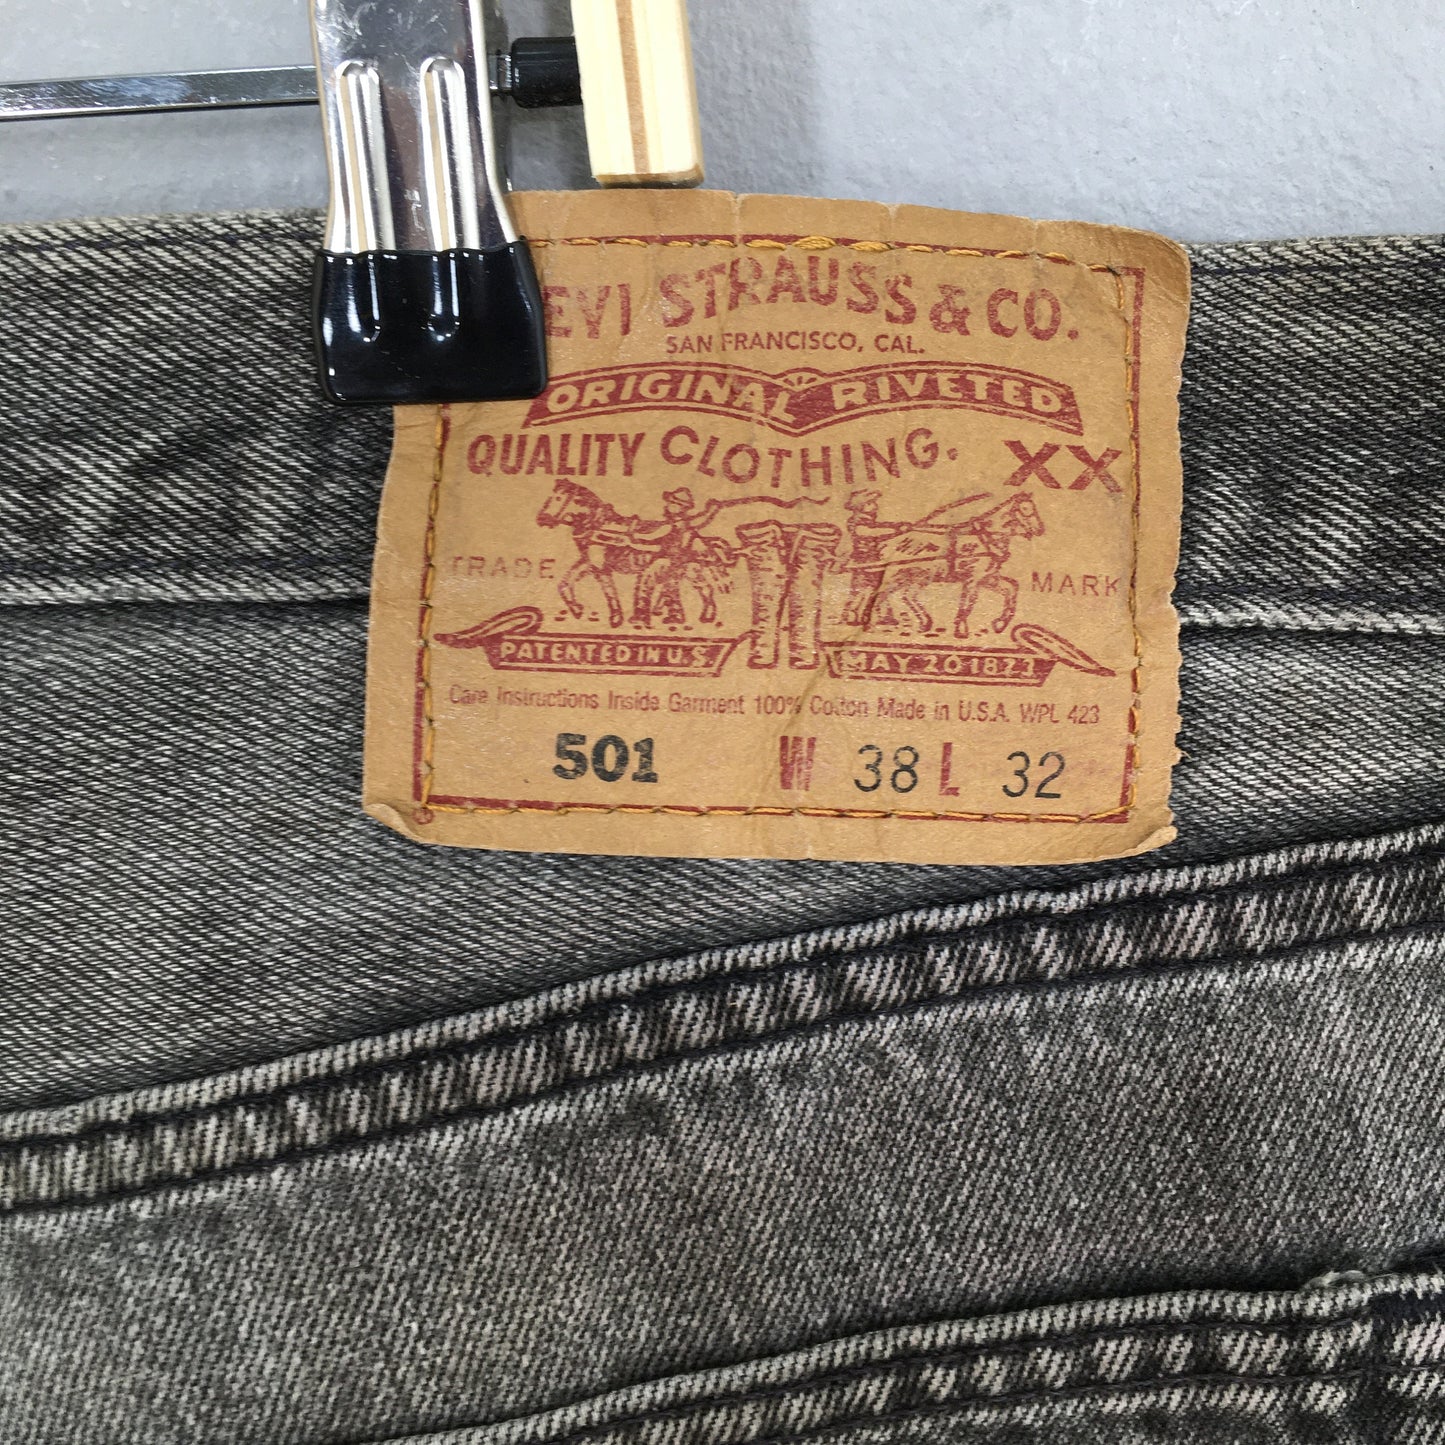 Levi's 501 Faded Black Distressed Jeans Size 37x28.5